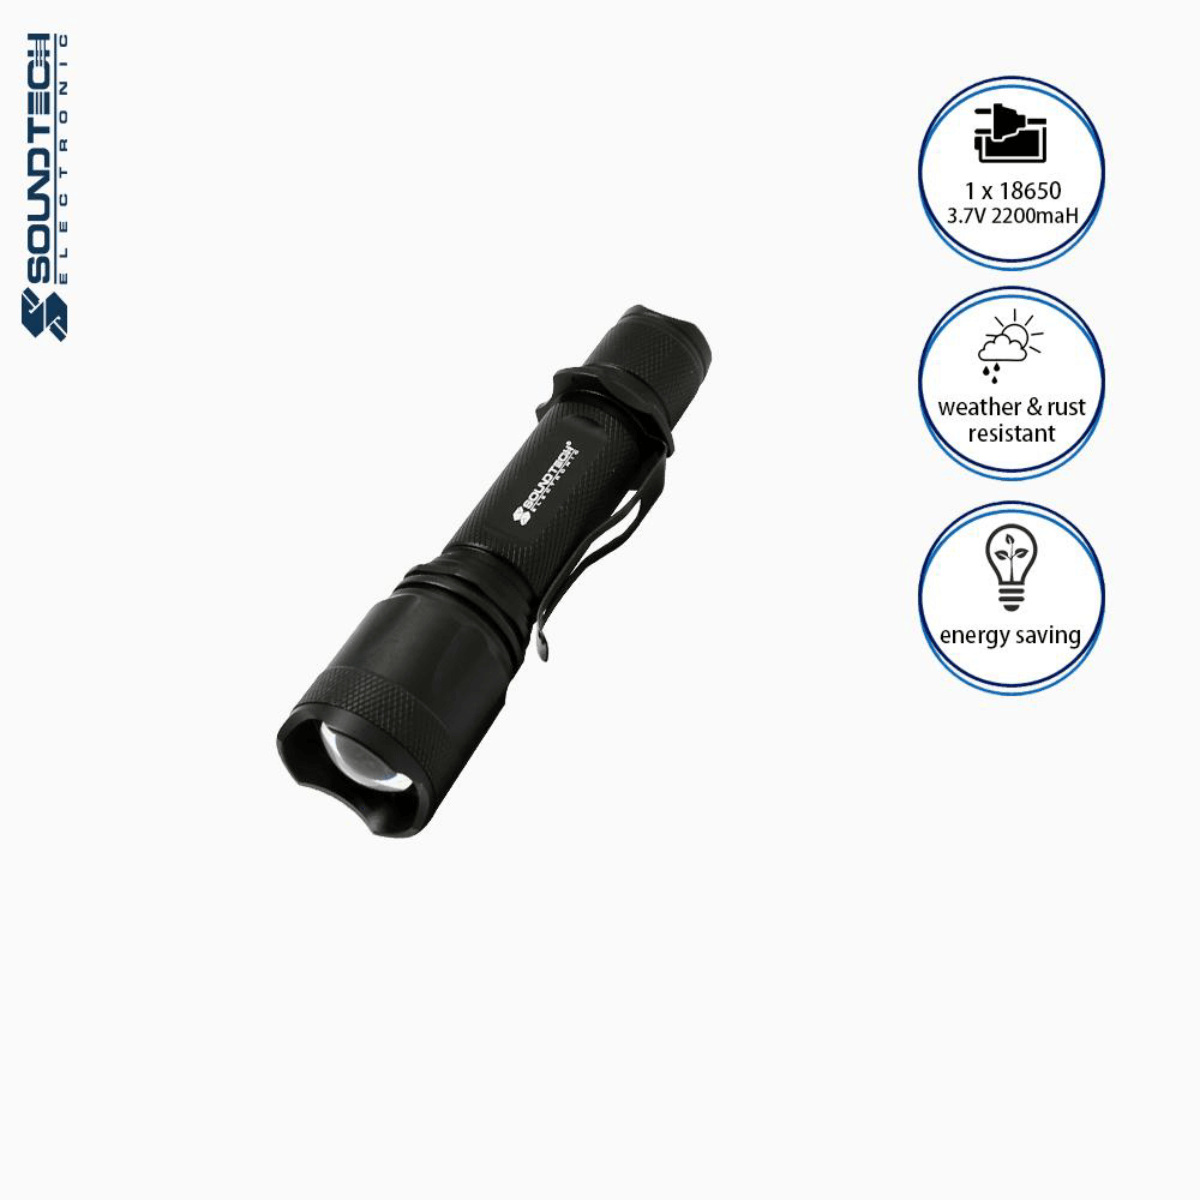 Soundteoh 10W USB Rechargeable Tactical Torch Light FL-80R